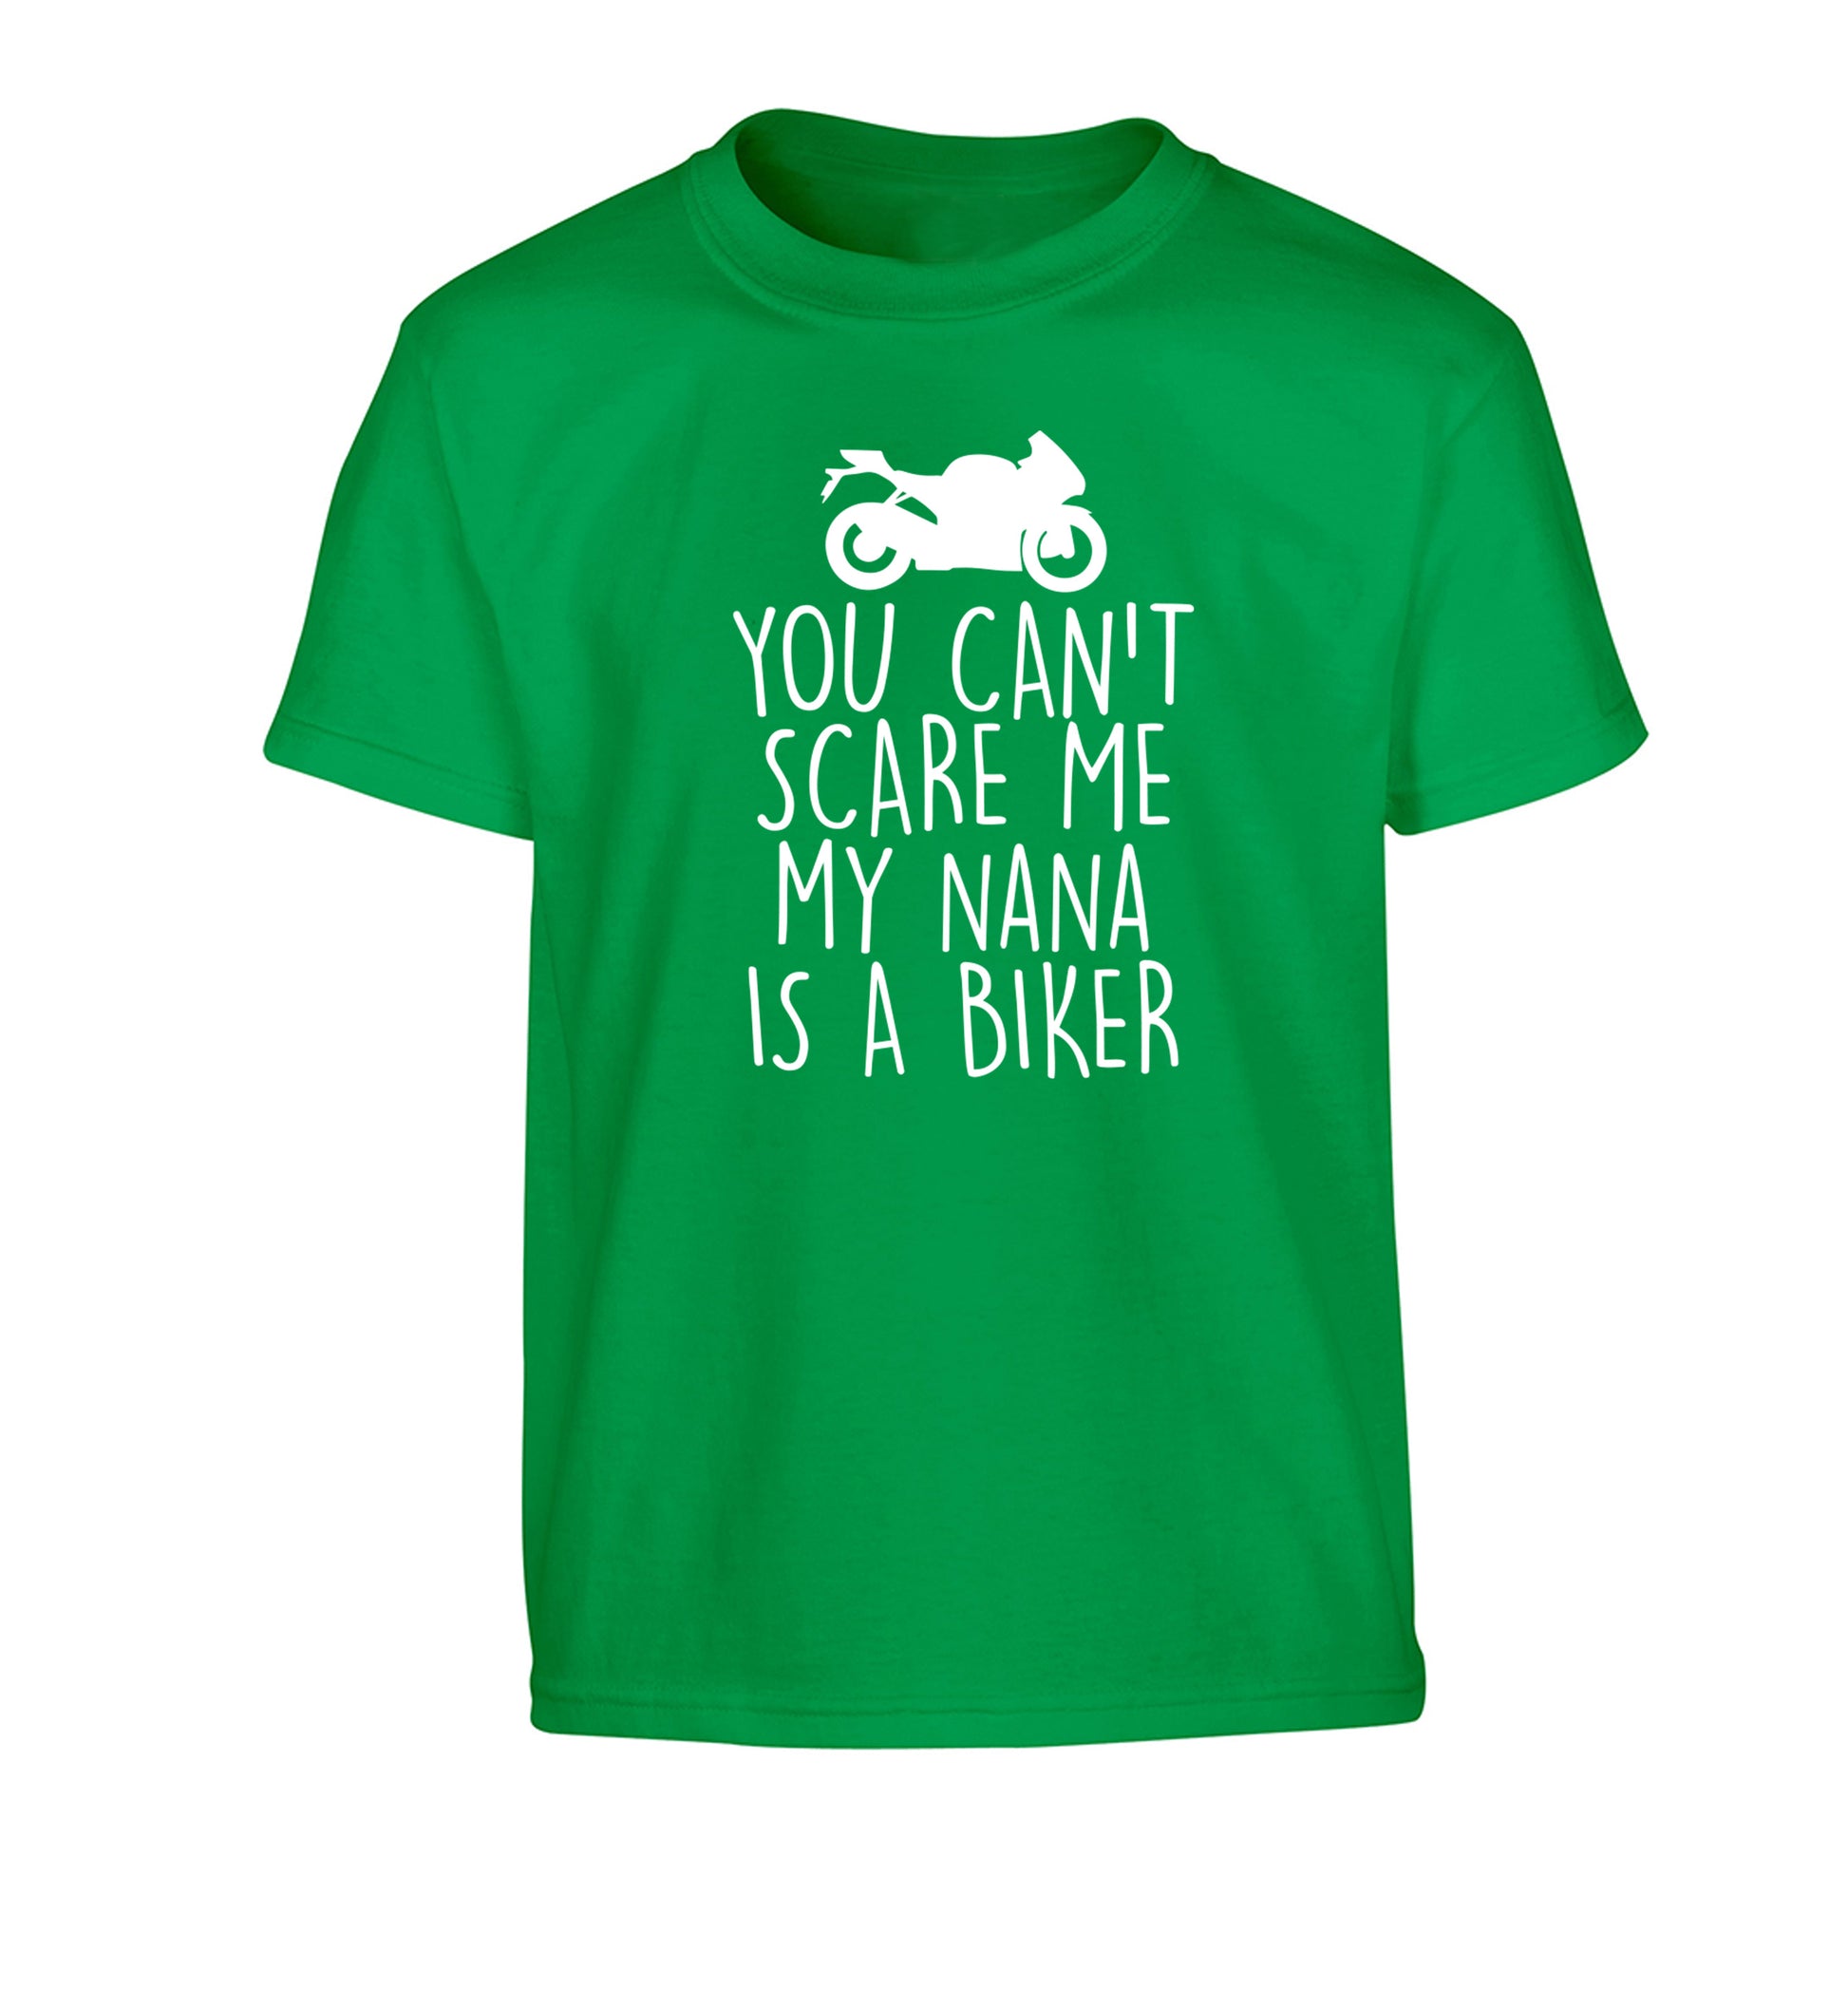 You can't scare me my nana is a biker Children's green Tshirt 12-13 Years